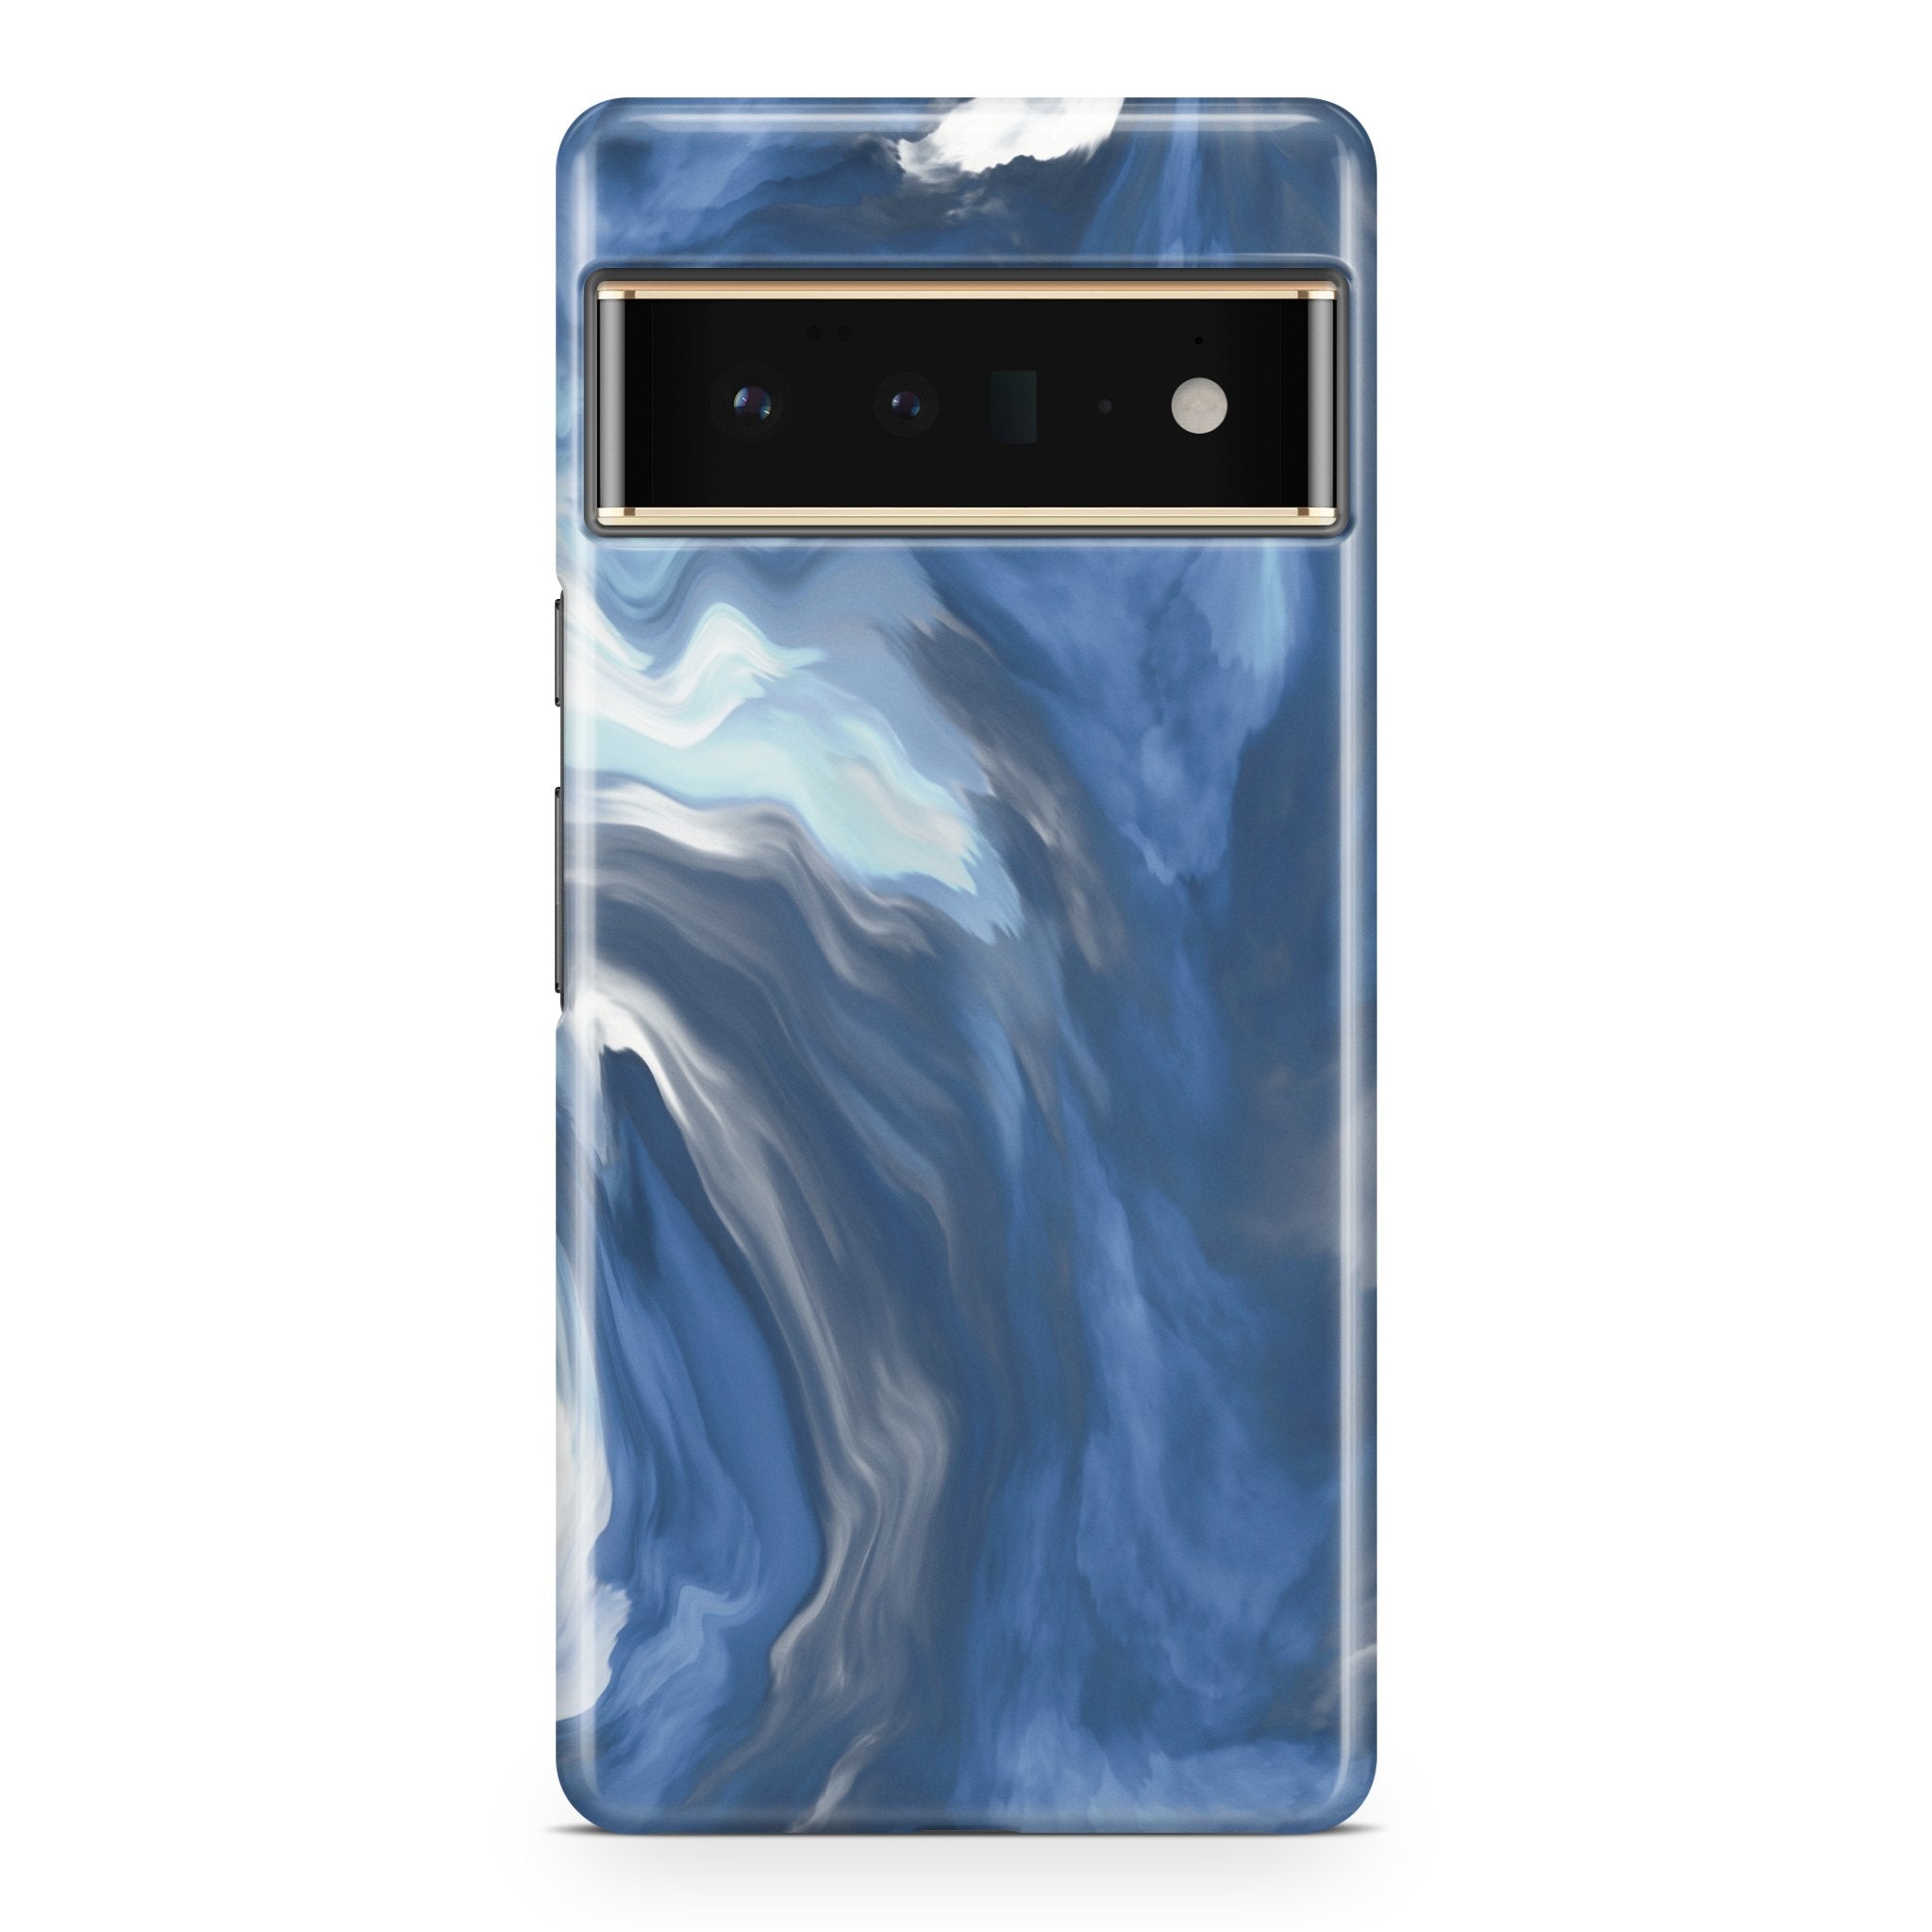 Winter Abstract I - Google phone case designs by CaseSwagger